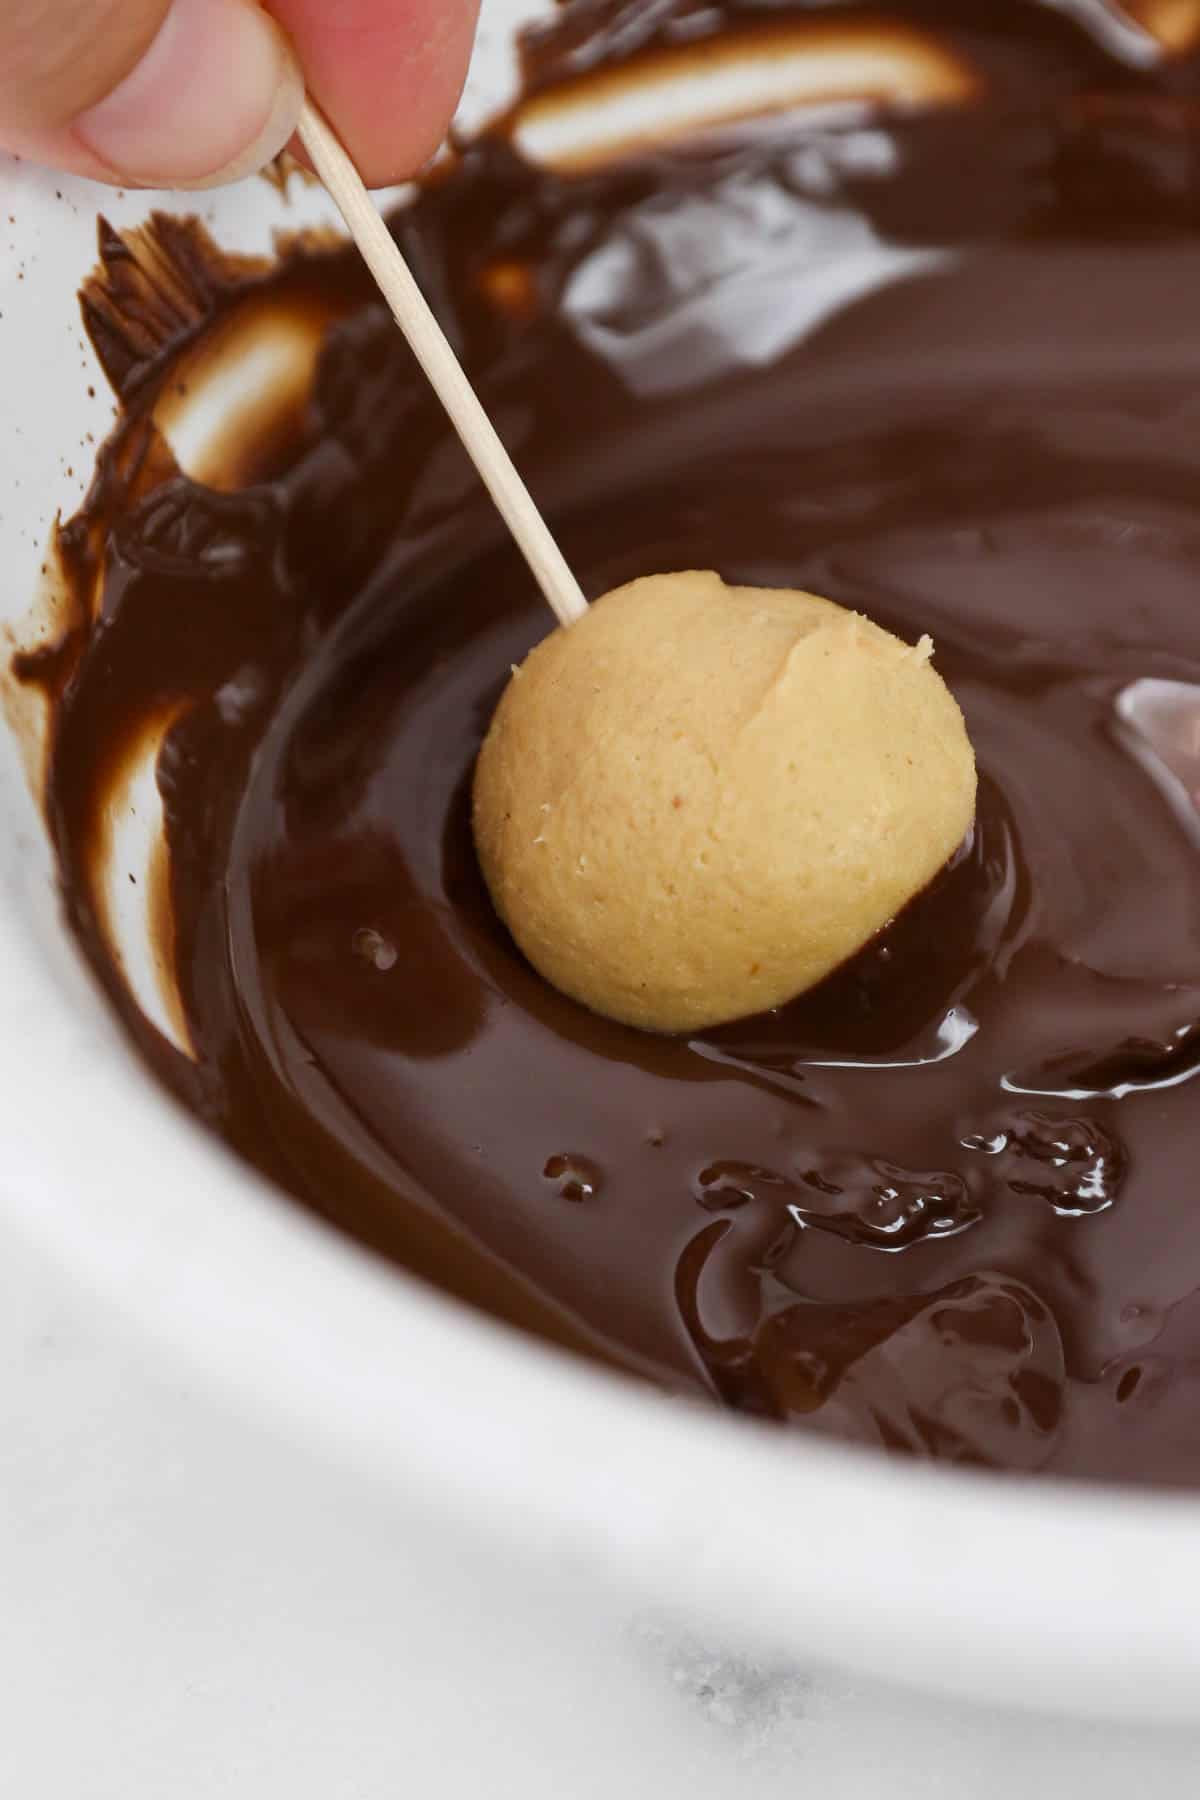 A hand dips a peanut butter ball on the end of a toothpick into a bowl of melted chocolate.